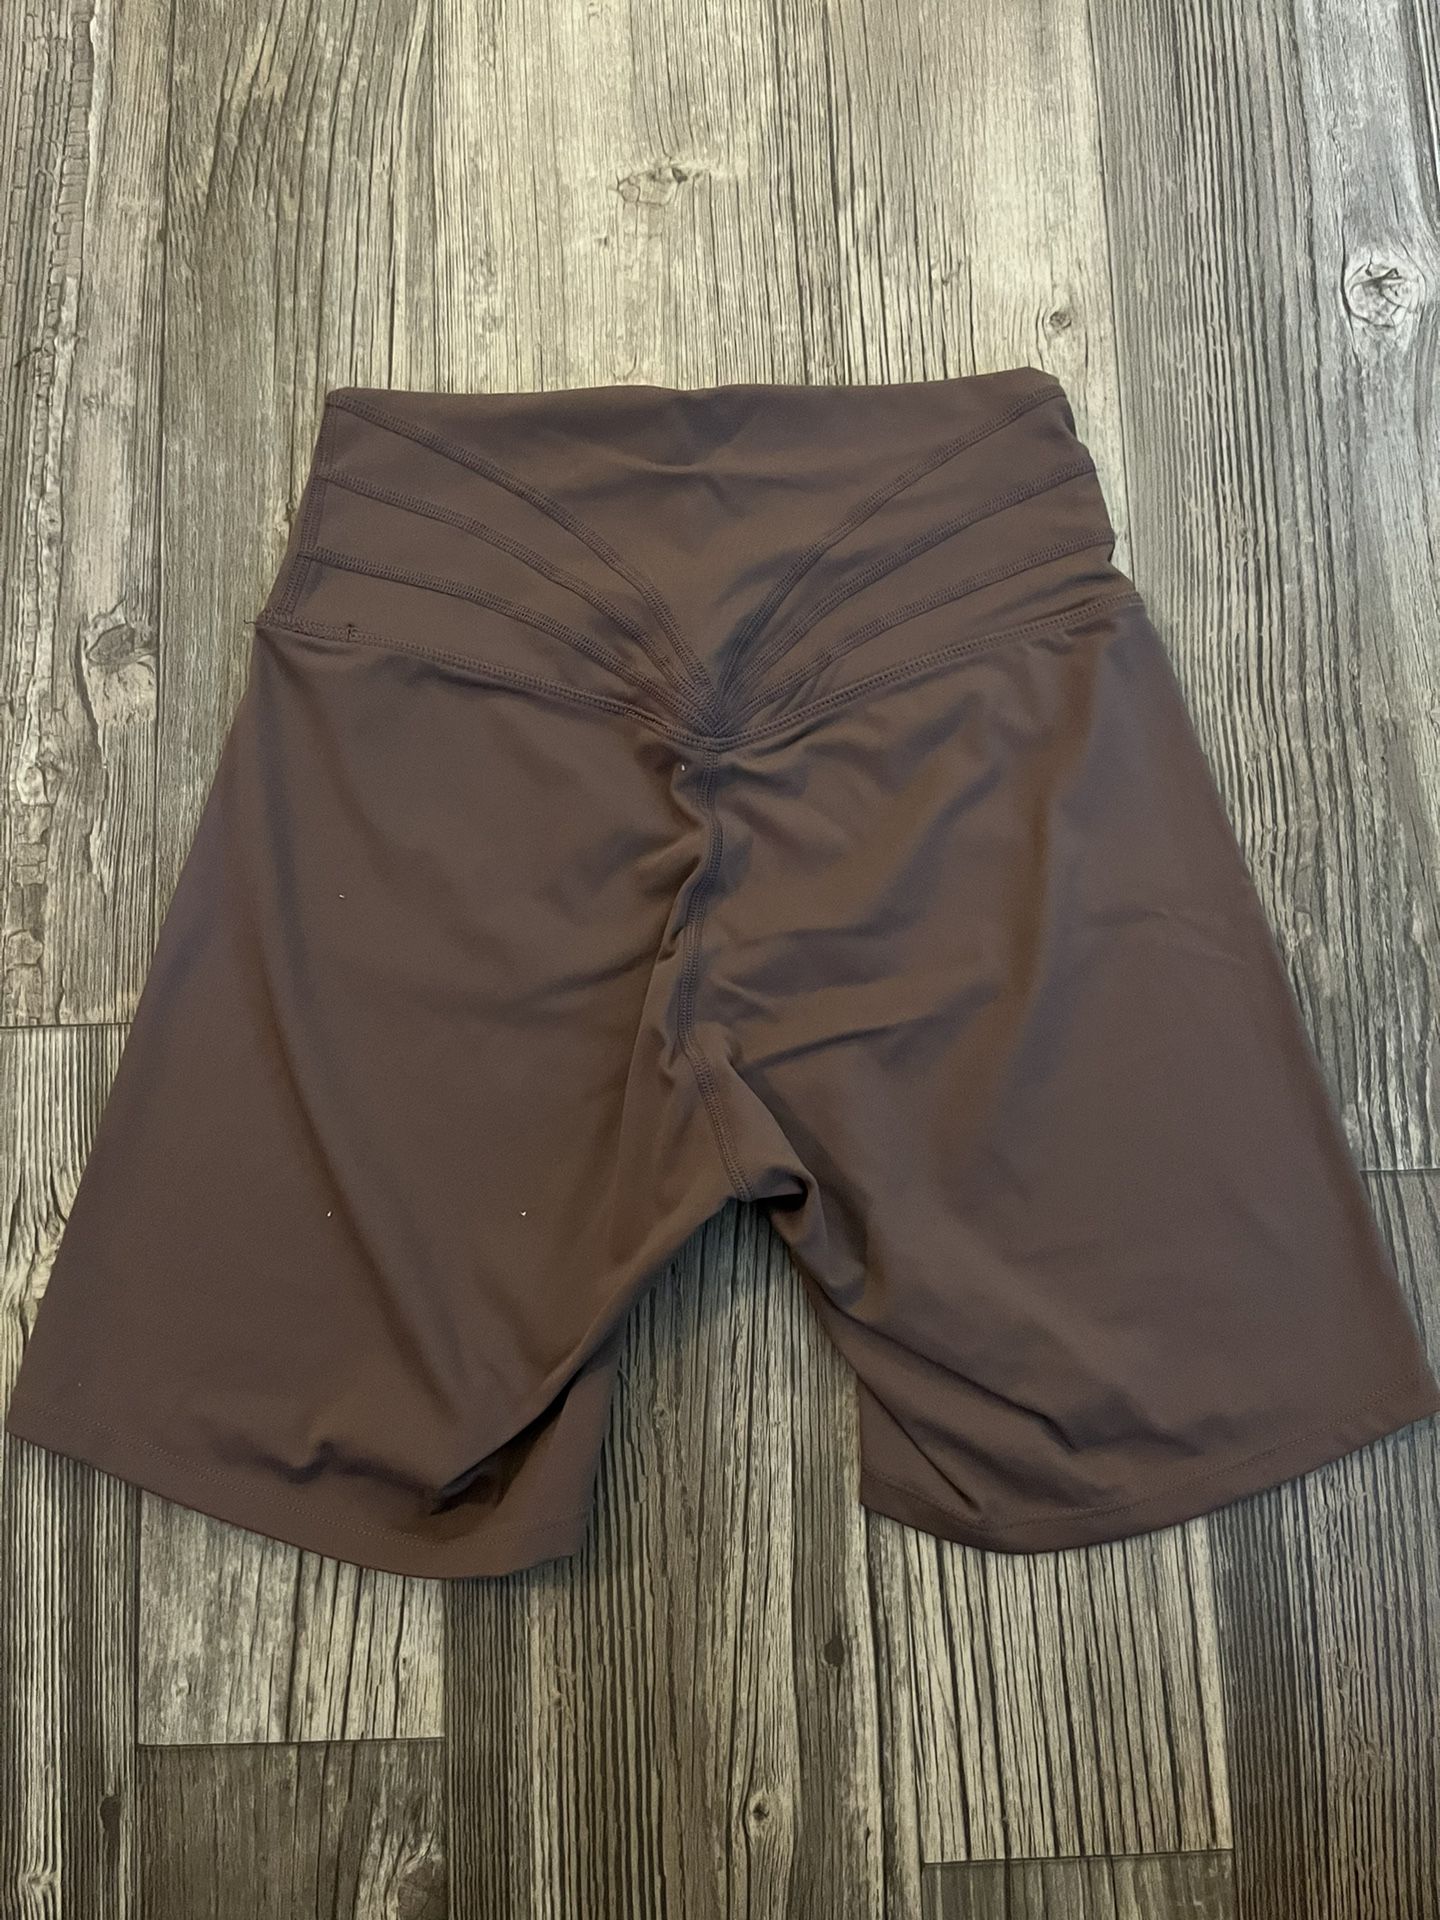 Buff Bunny Workout Shorts Dupes for Sale in Rancho Cucamonga